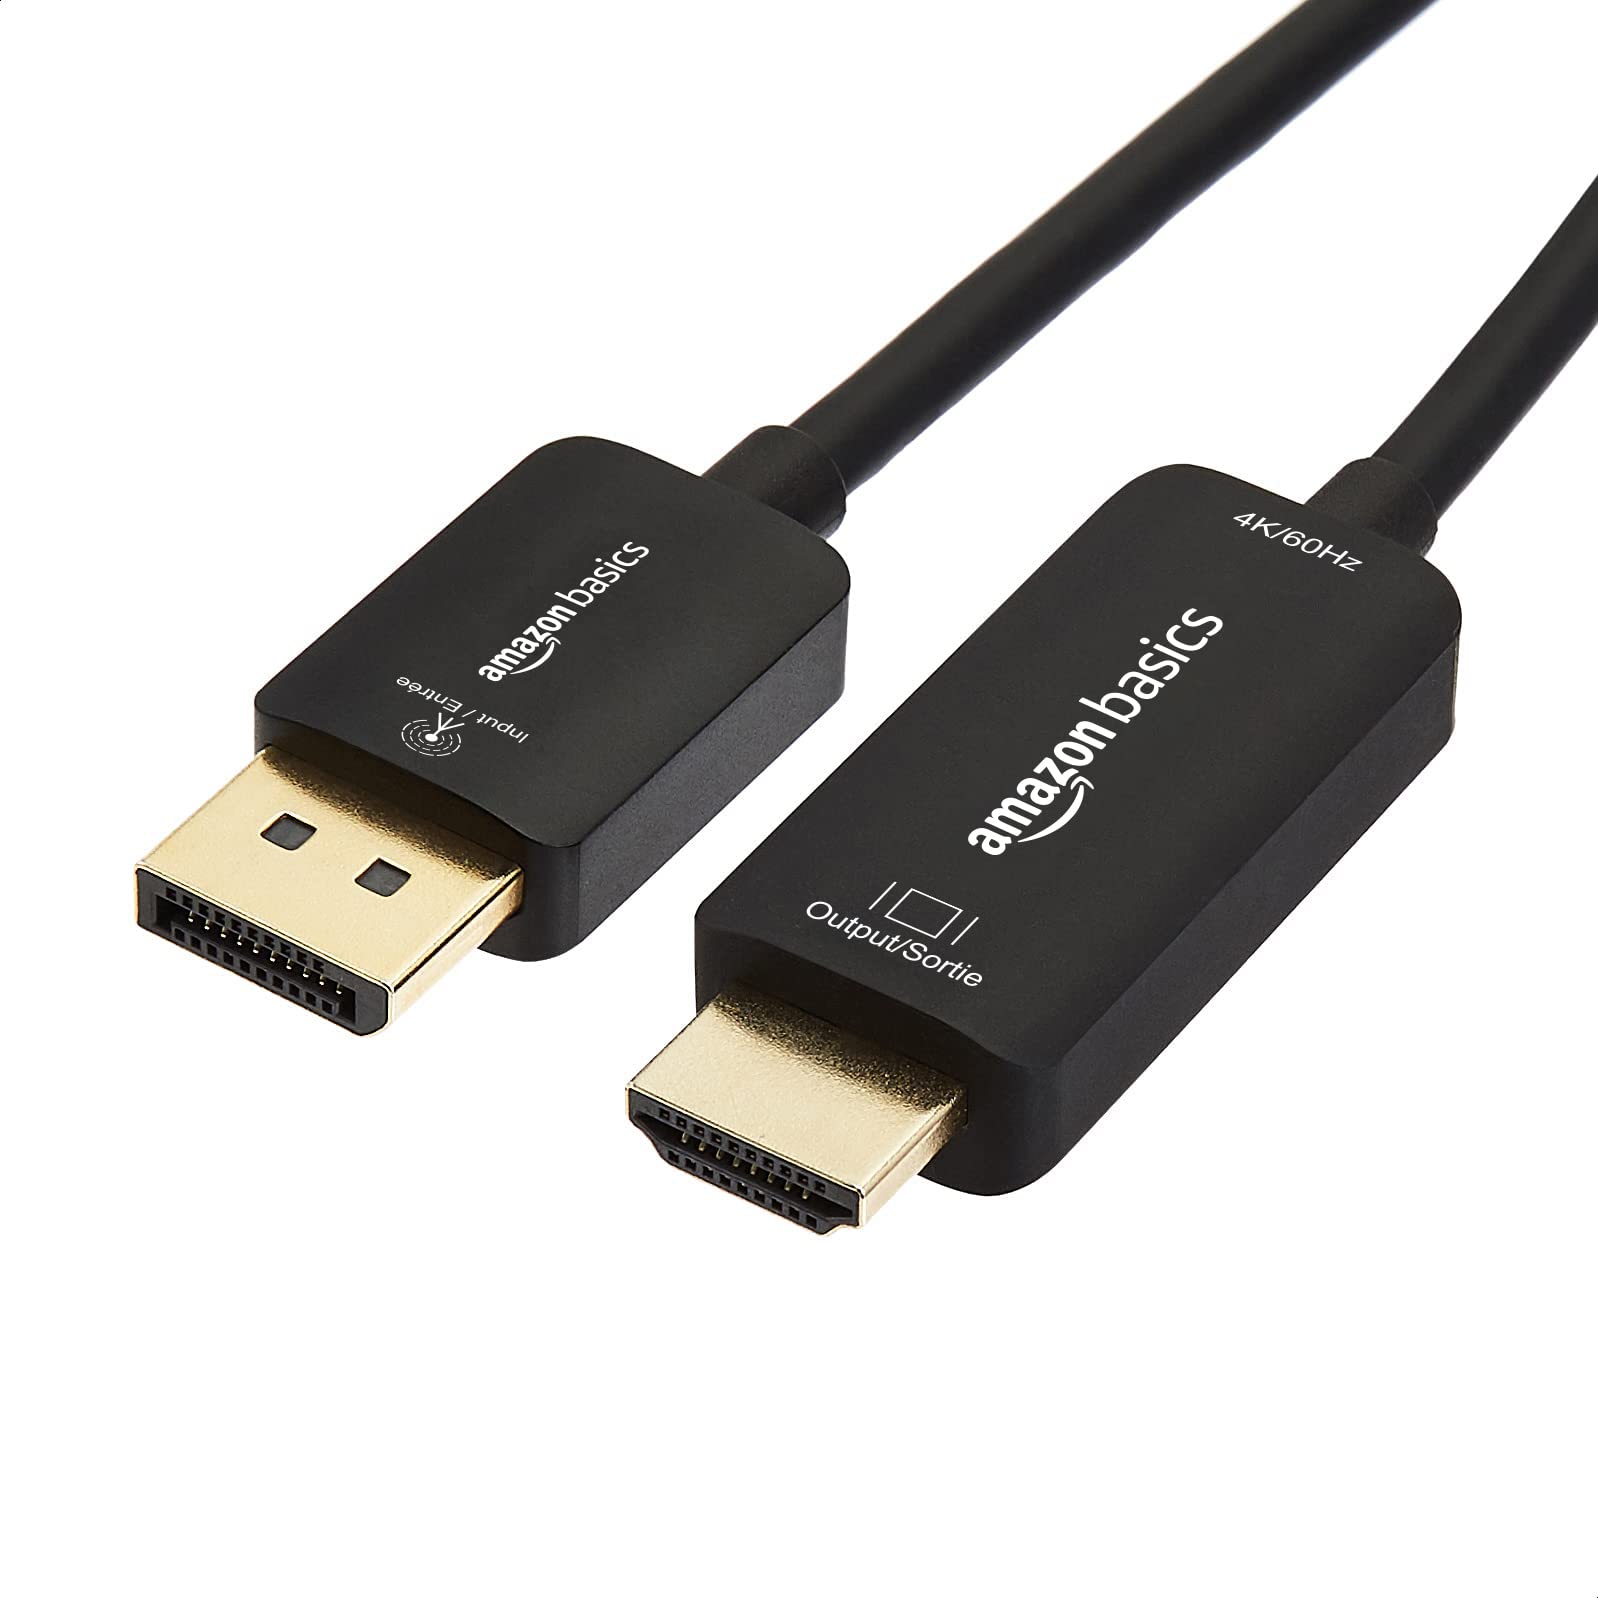 Amazon Basics DisplayPort to HDMI Display Cable, Uni-Directional, 4K@60Hz, 1920x1200, 1080p, Gold-Plated Plugs, 6 Foot, Black